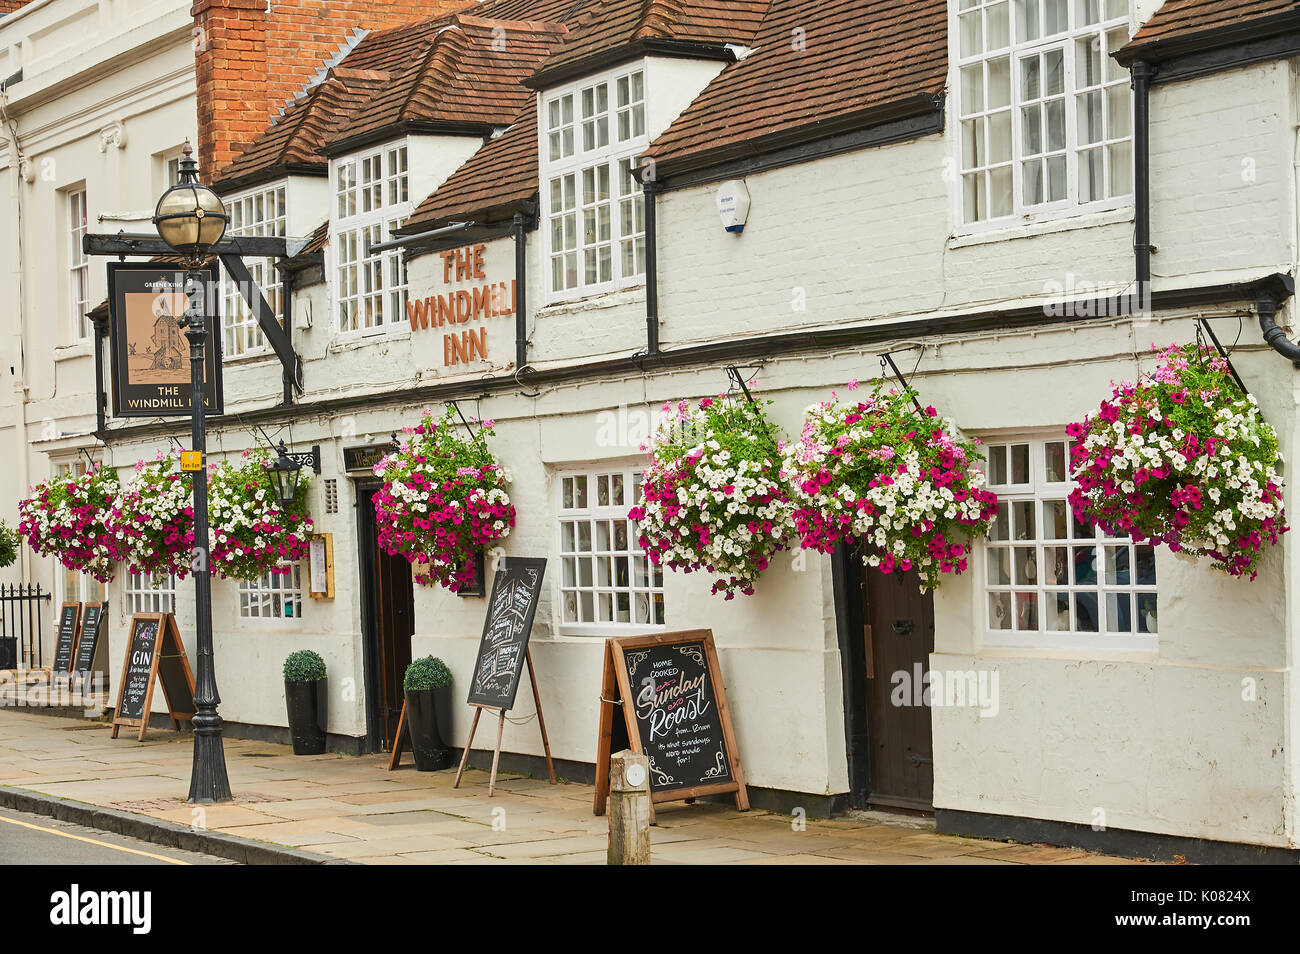 Il Windmill Inn in Stratford upon Avon, decked out in colorate nei cestini appesi. Foto Stock